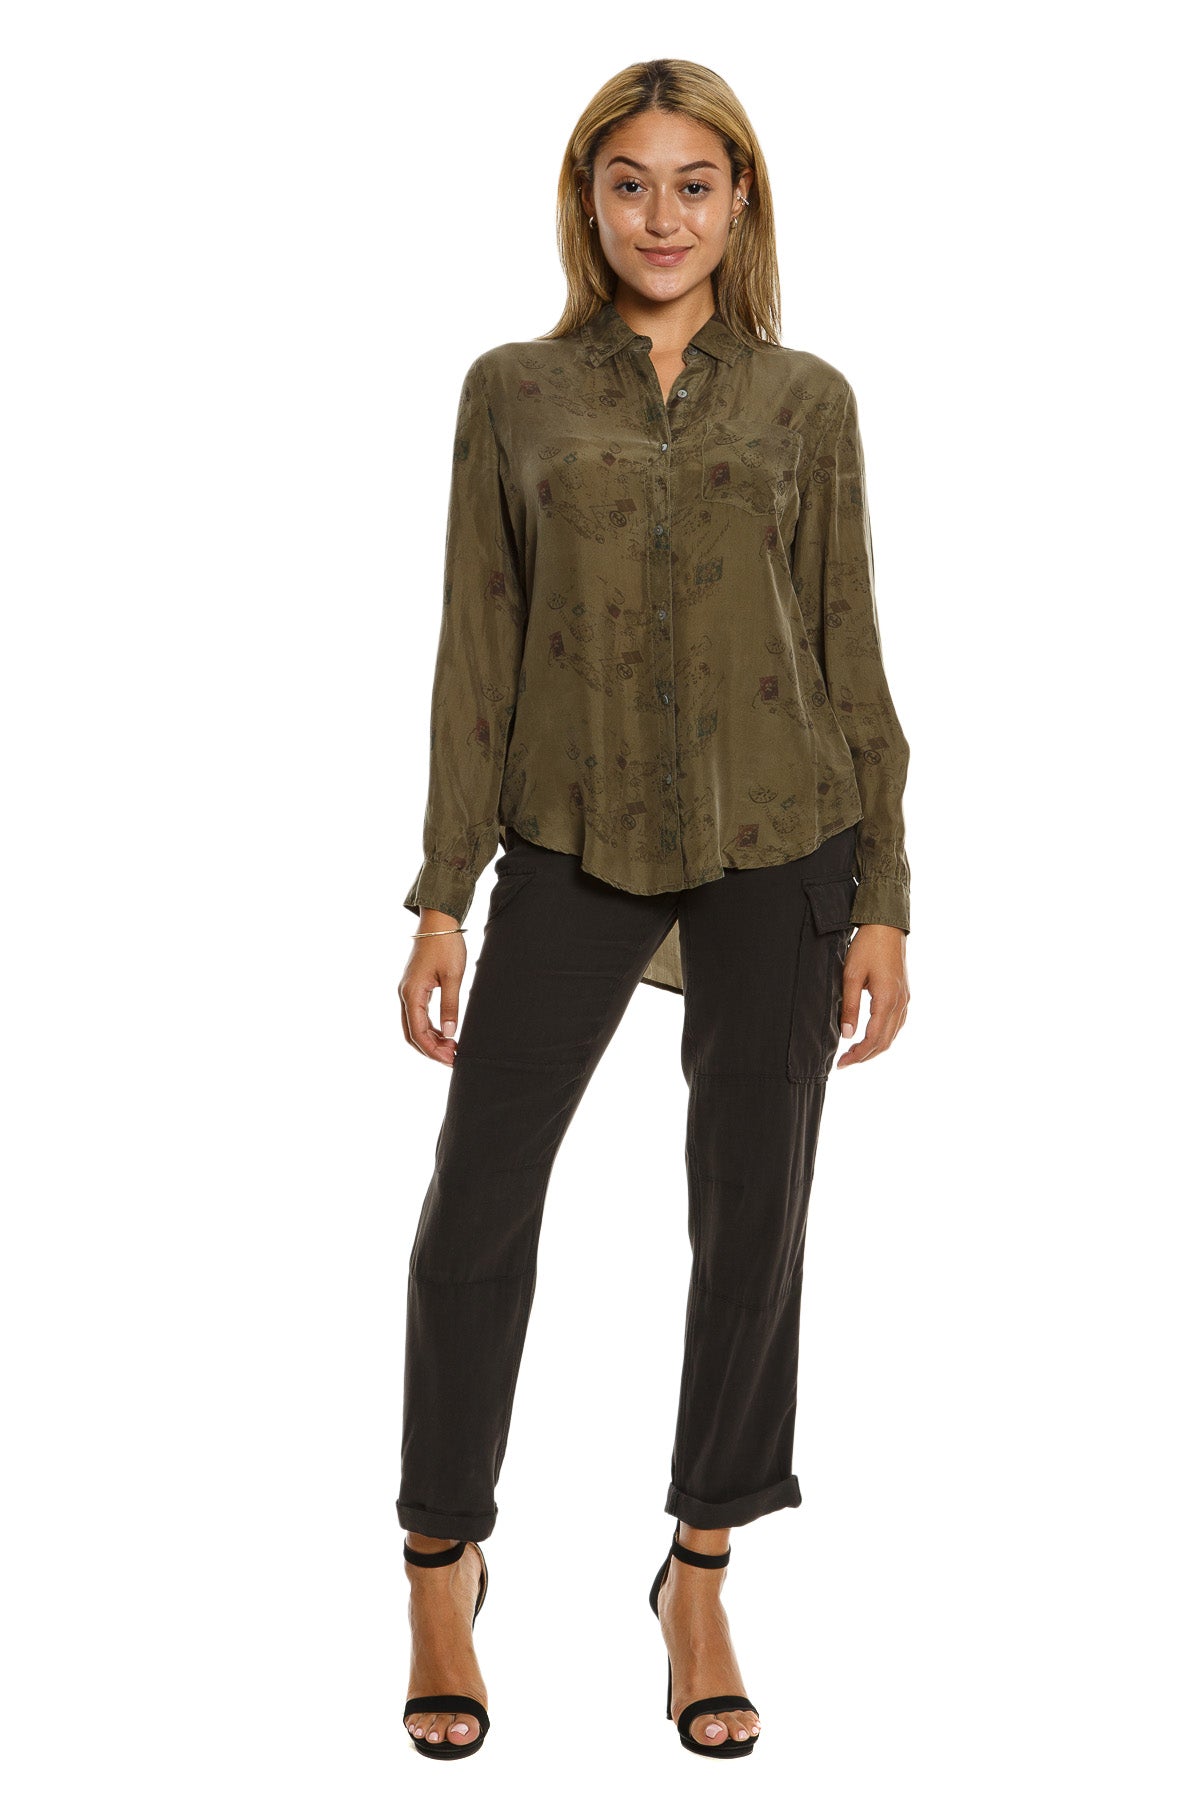 100% Silk long sleeves blouse in Olive